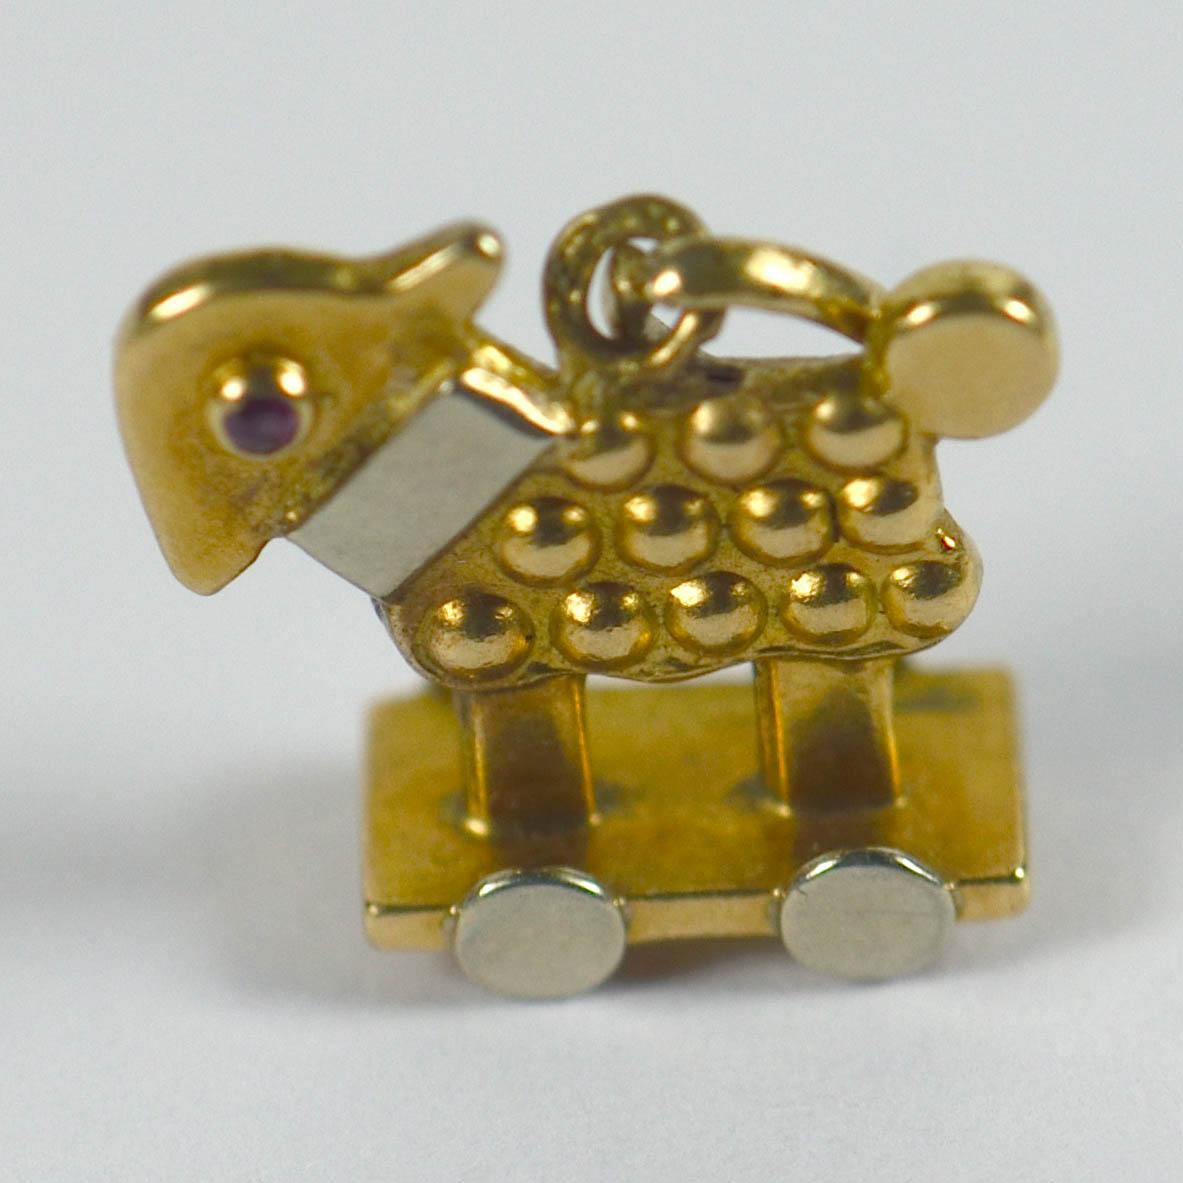 An adorable toy sheep charm in white and yellow 18 karat gold with ruby eyes. The charm is double sided, and was probably made by Cartier as part of its nursery charm set. An ideal gift to commemorate a new addition to the family! Stamped with